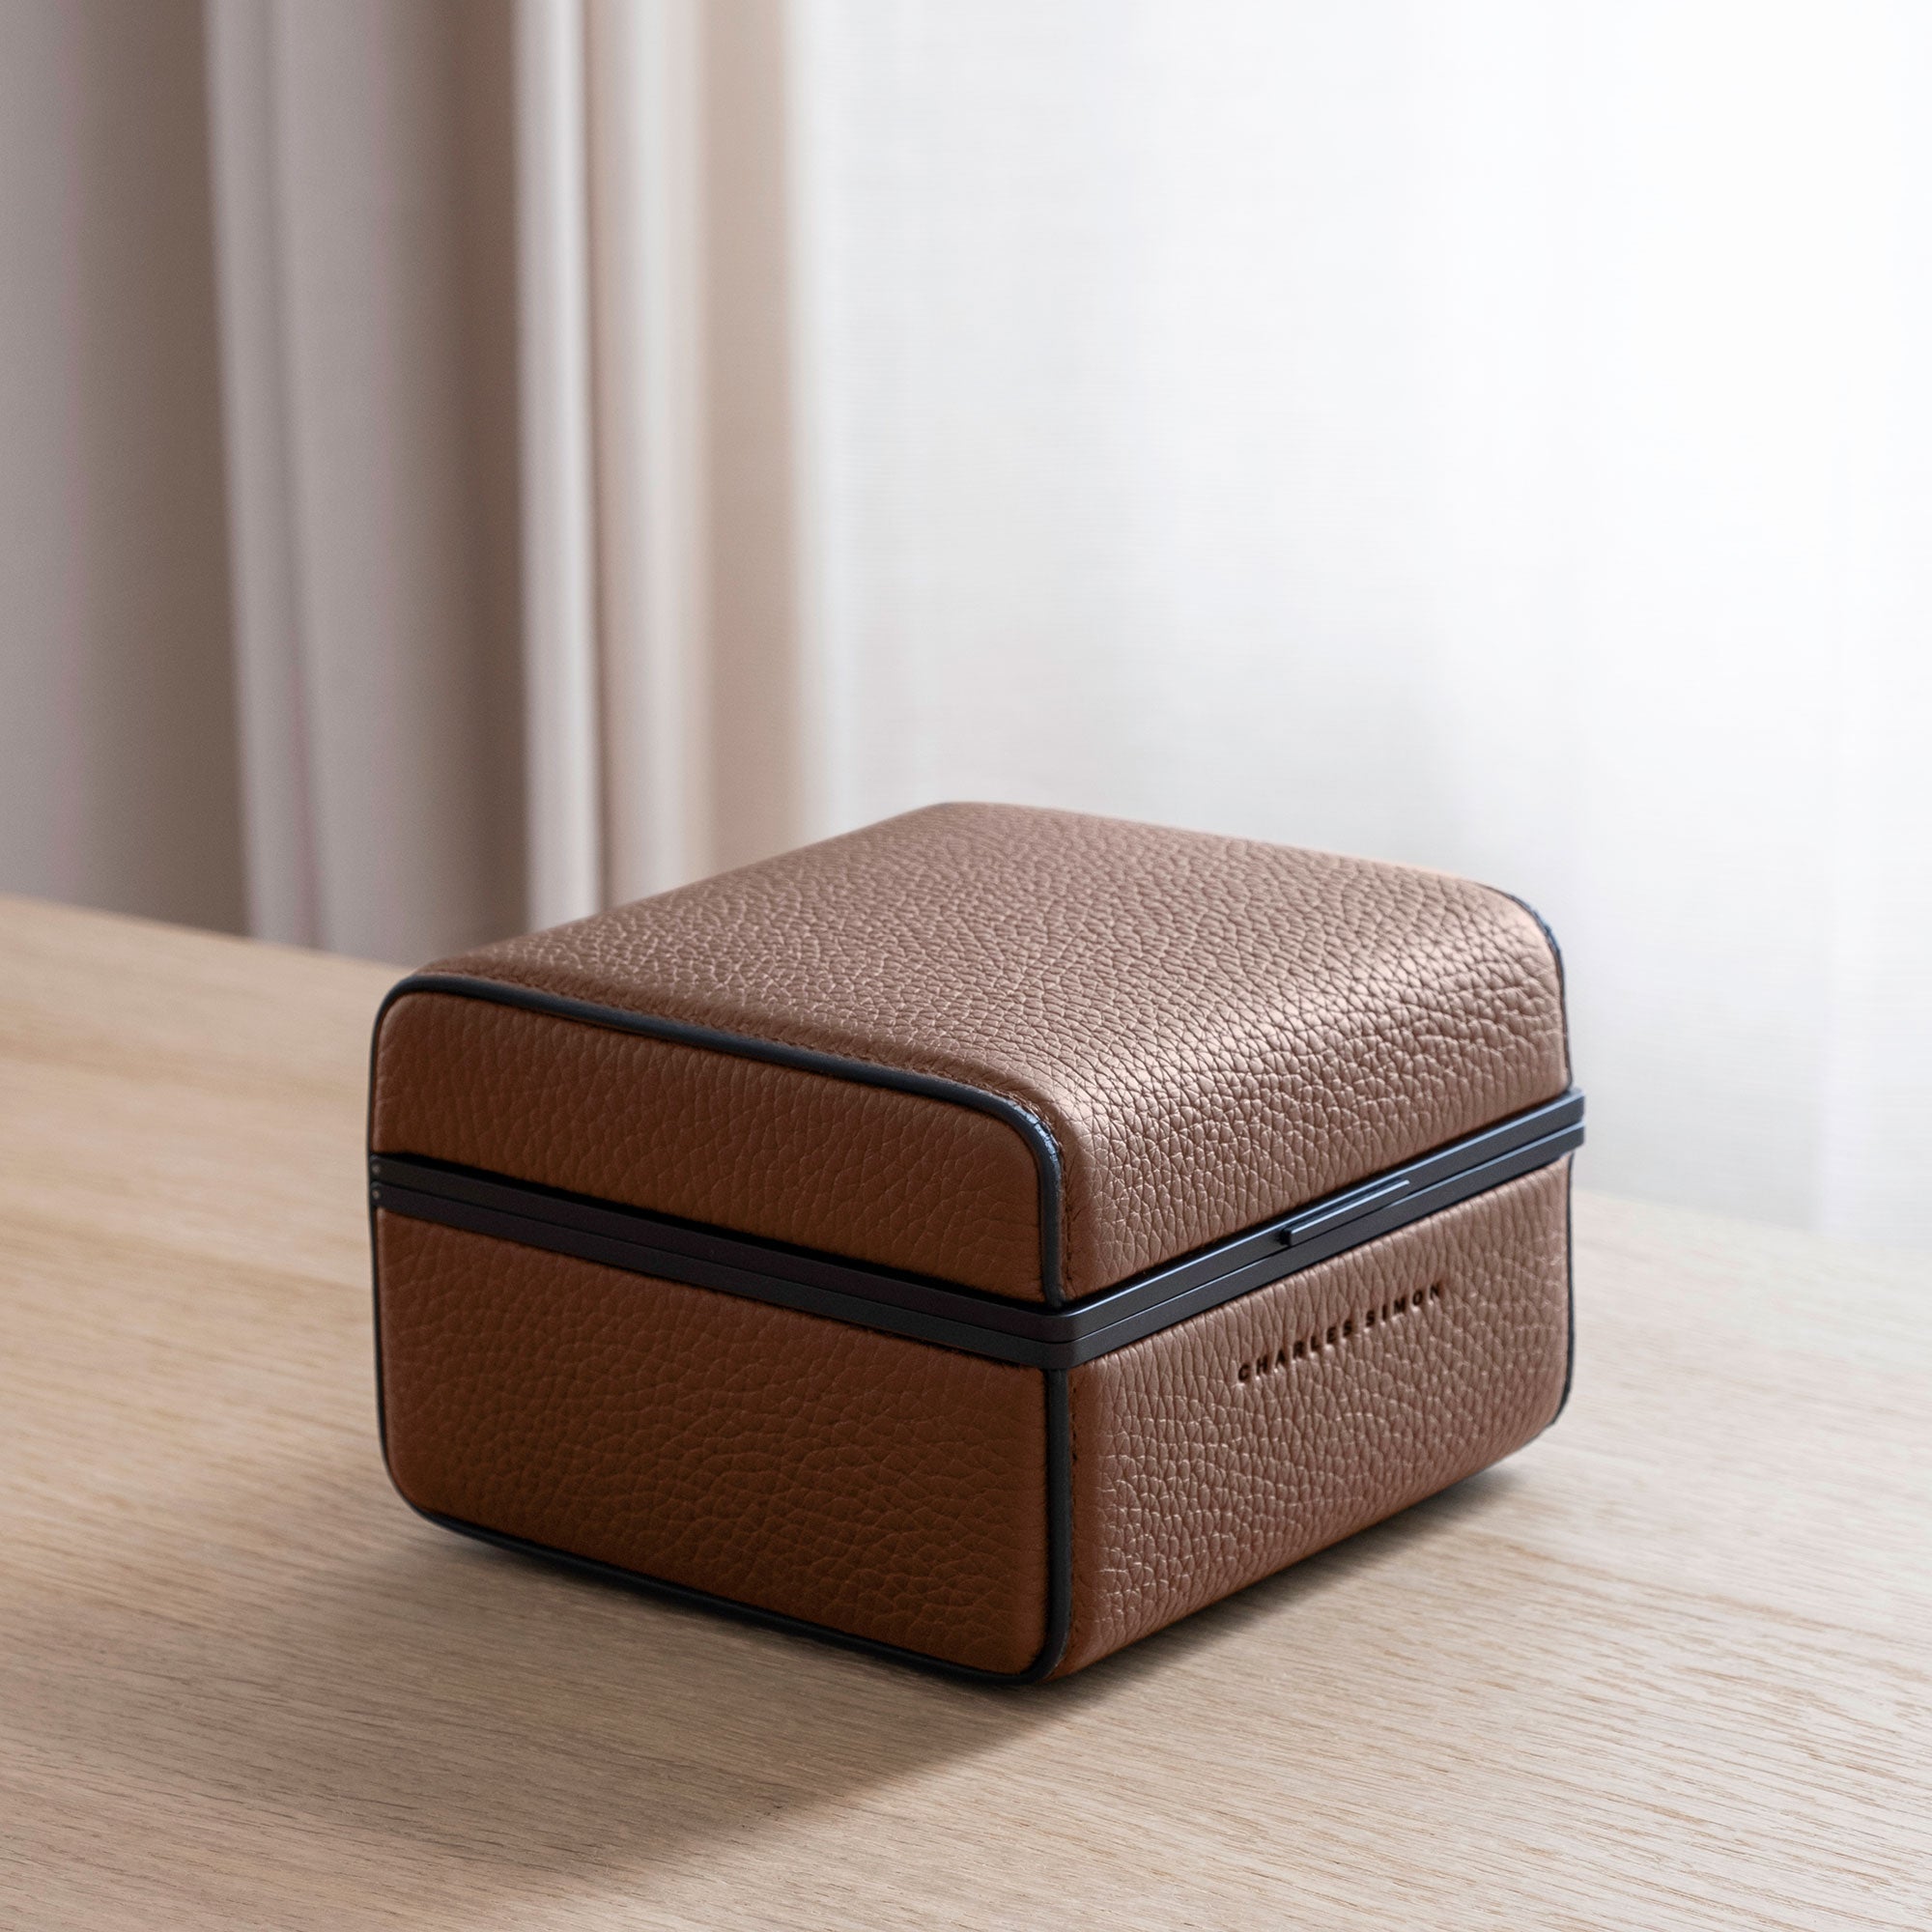 Lifestyle photo of closed Eaton 1 Watch case in tan leather and black anodized aluminum